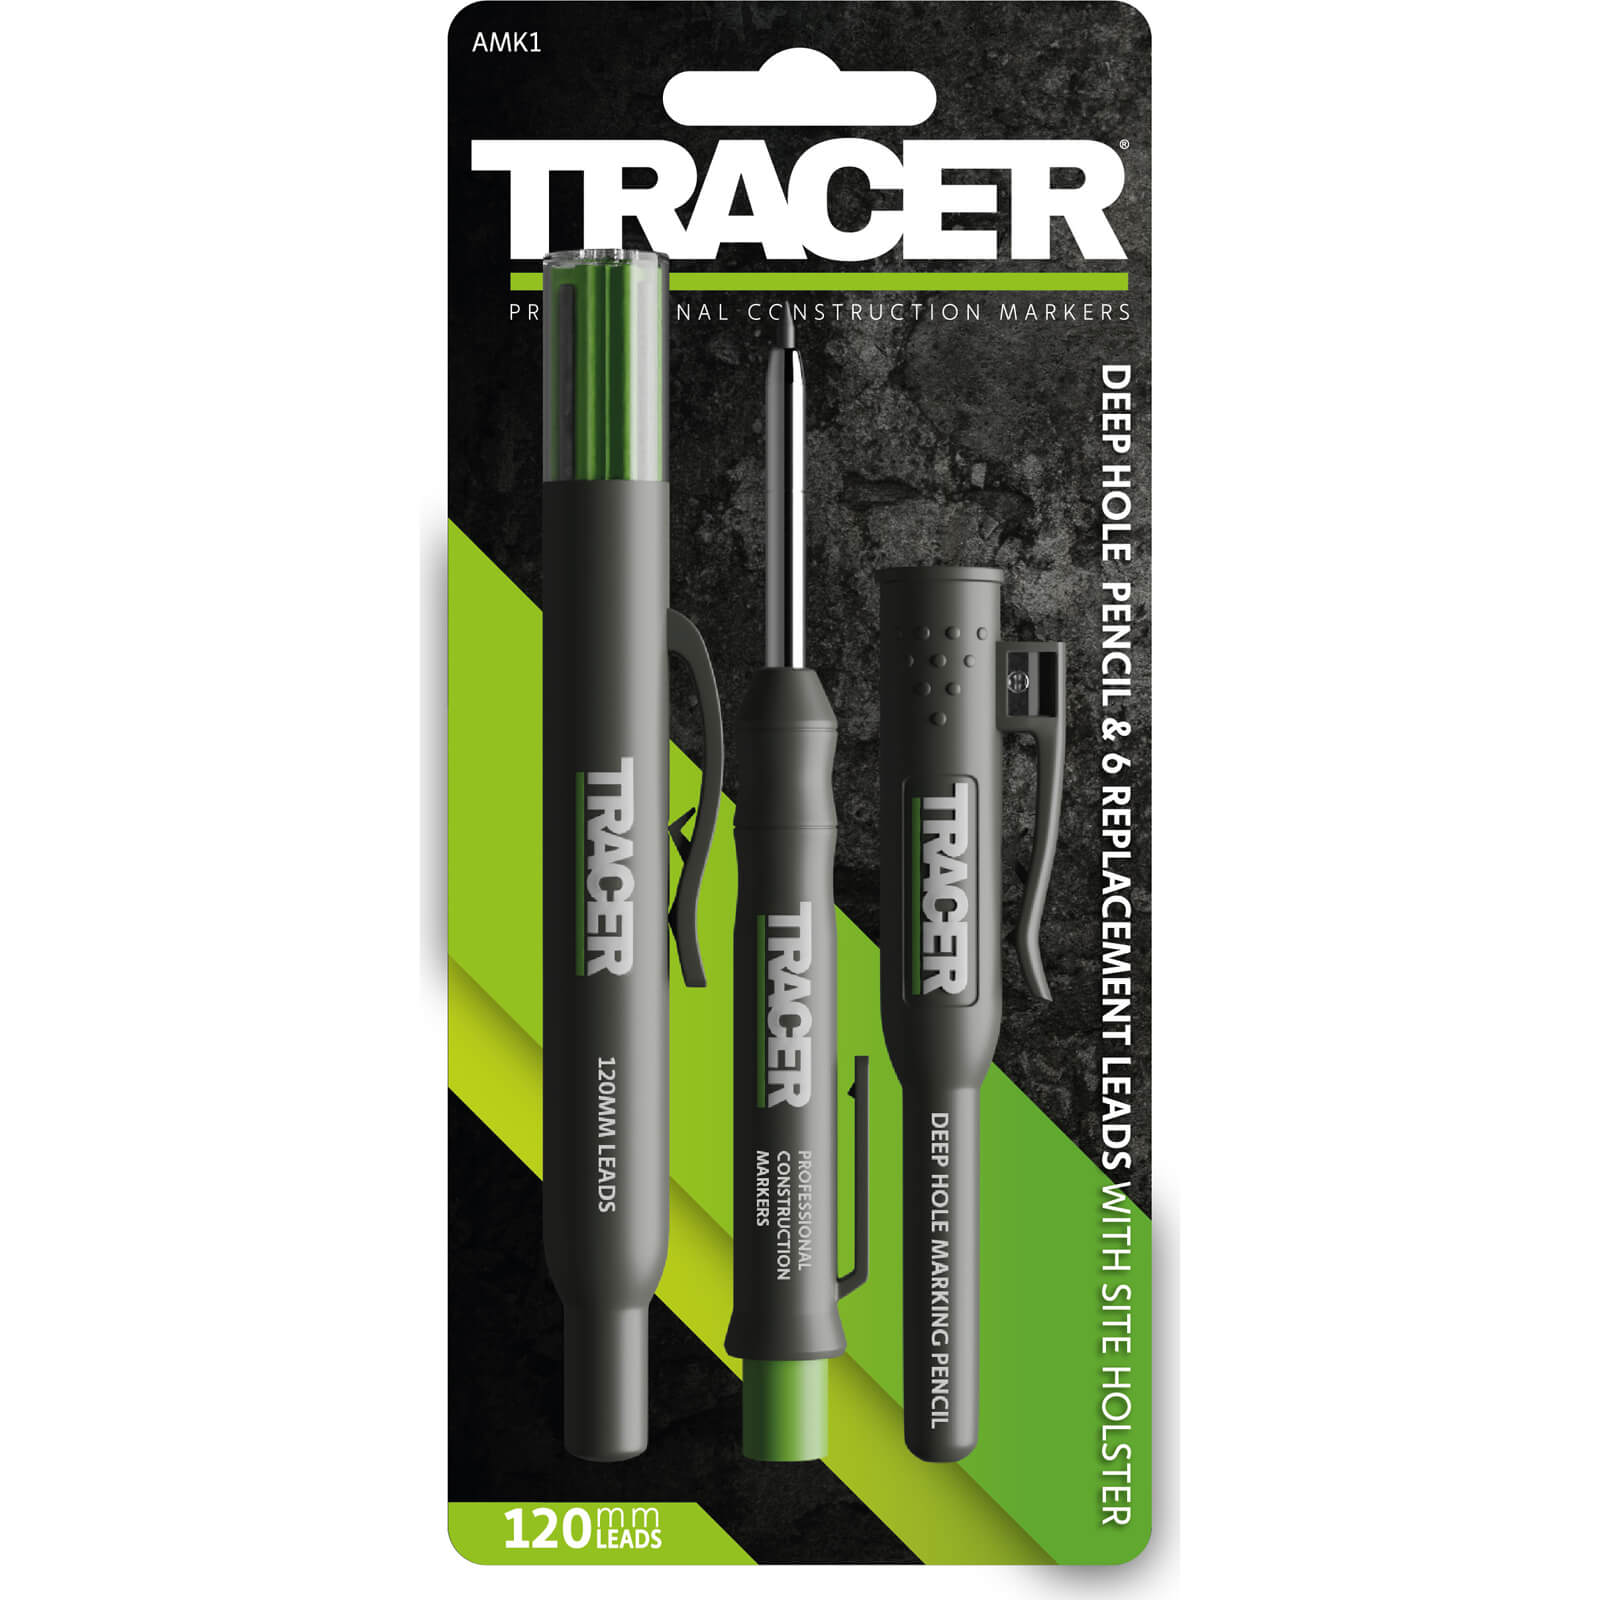 Tracer Deep Pencil Marker and Replacement Leads